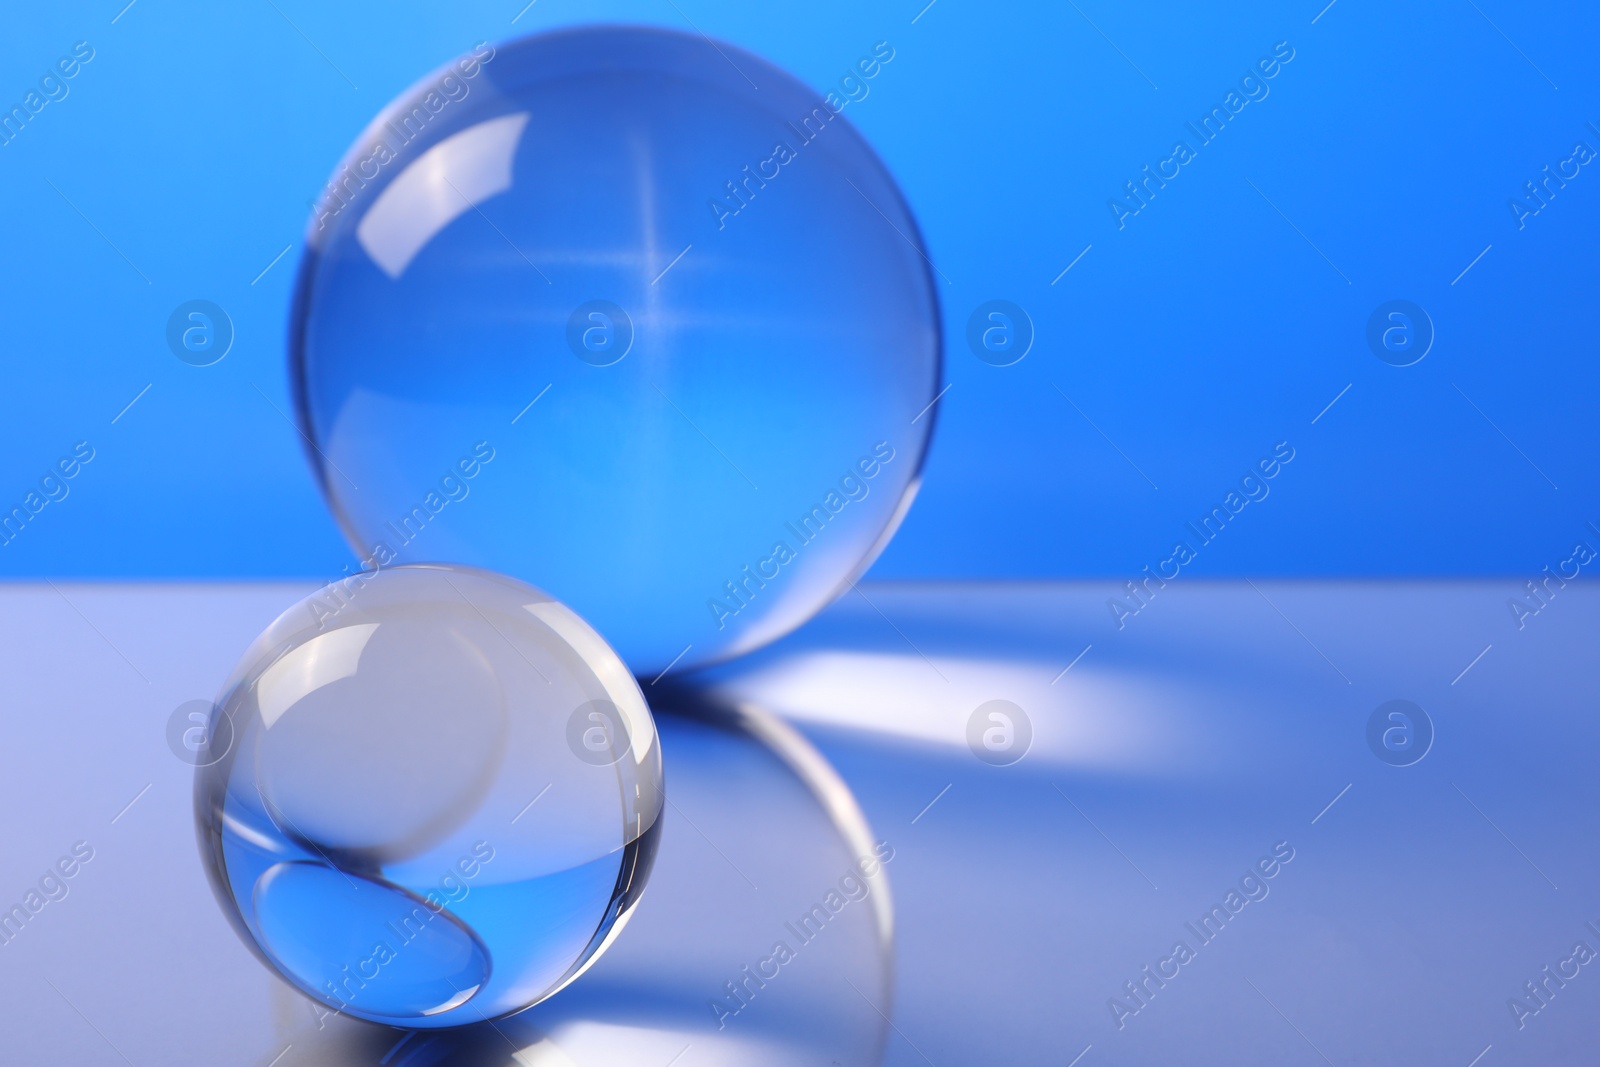 Photo of Transparent glass balls on mirror surface against blue background